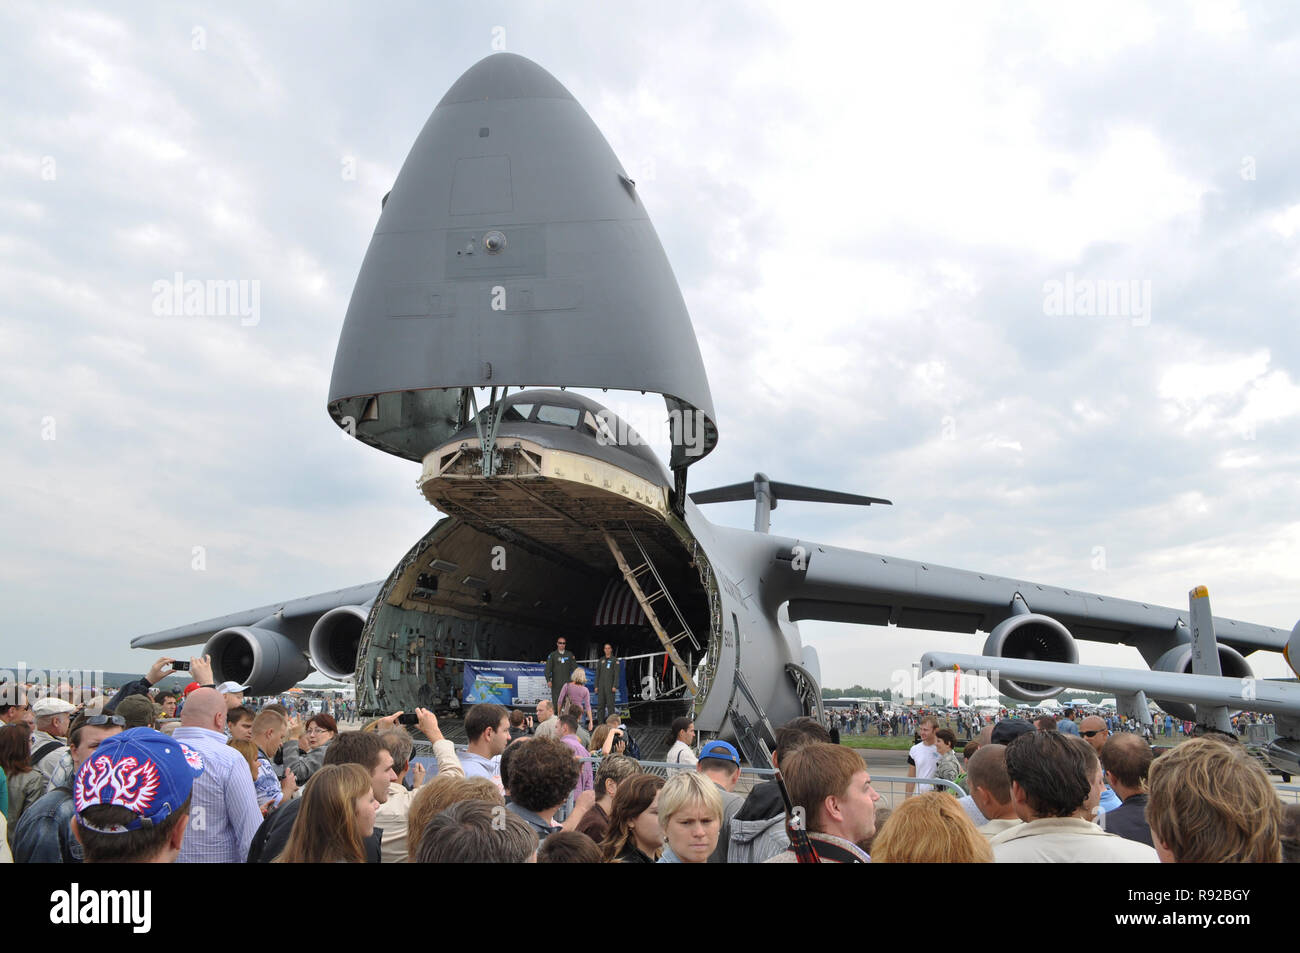 Zhukovsky, Russia. 20 August 2011. Air show MAKS-2011. Lockheed C-5M Super Galaxy military transport aircraft. Open front section Stock Photo